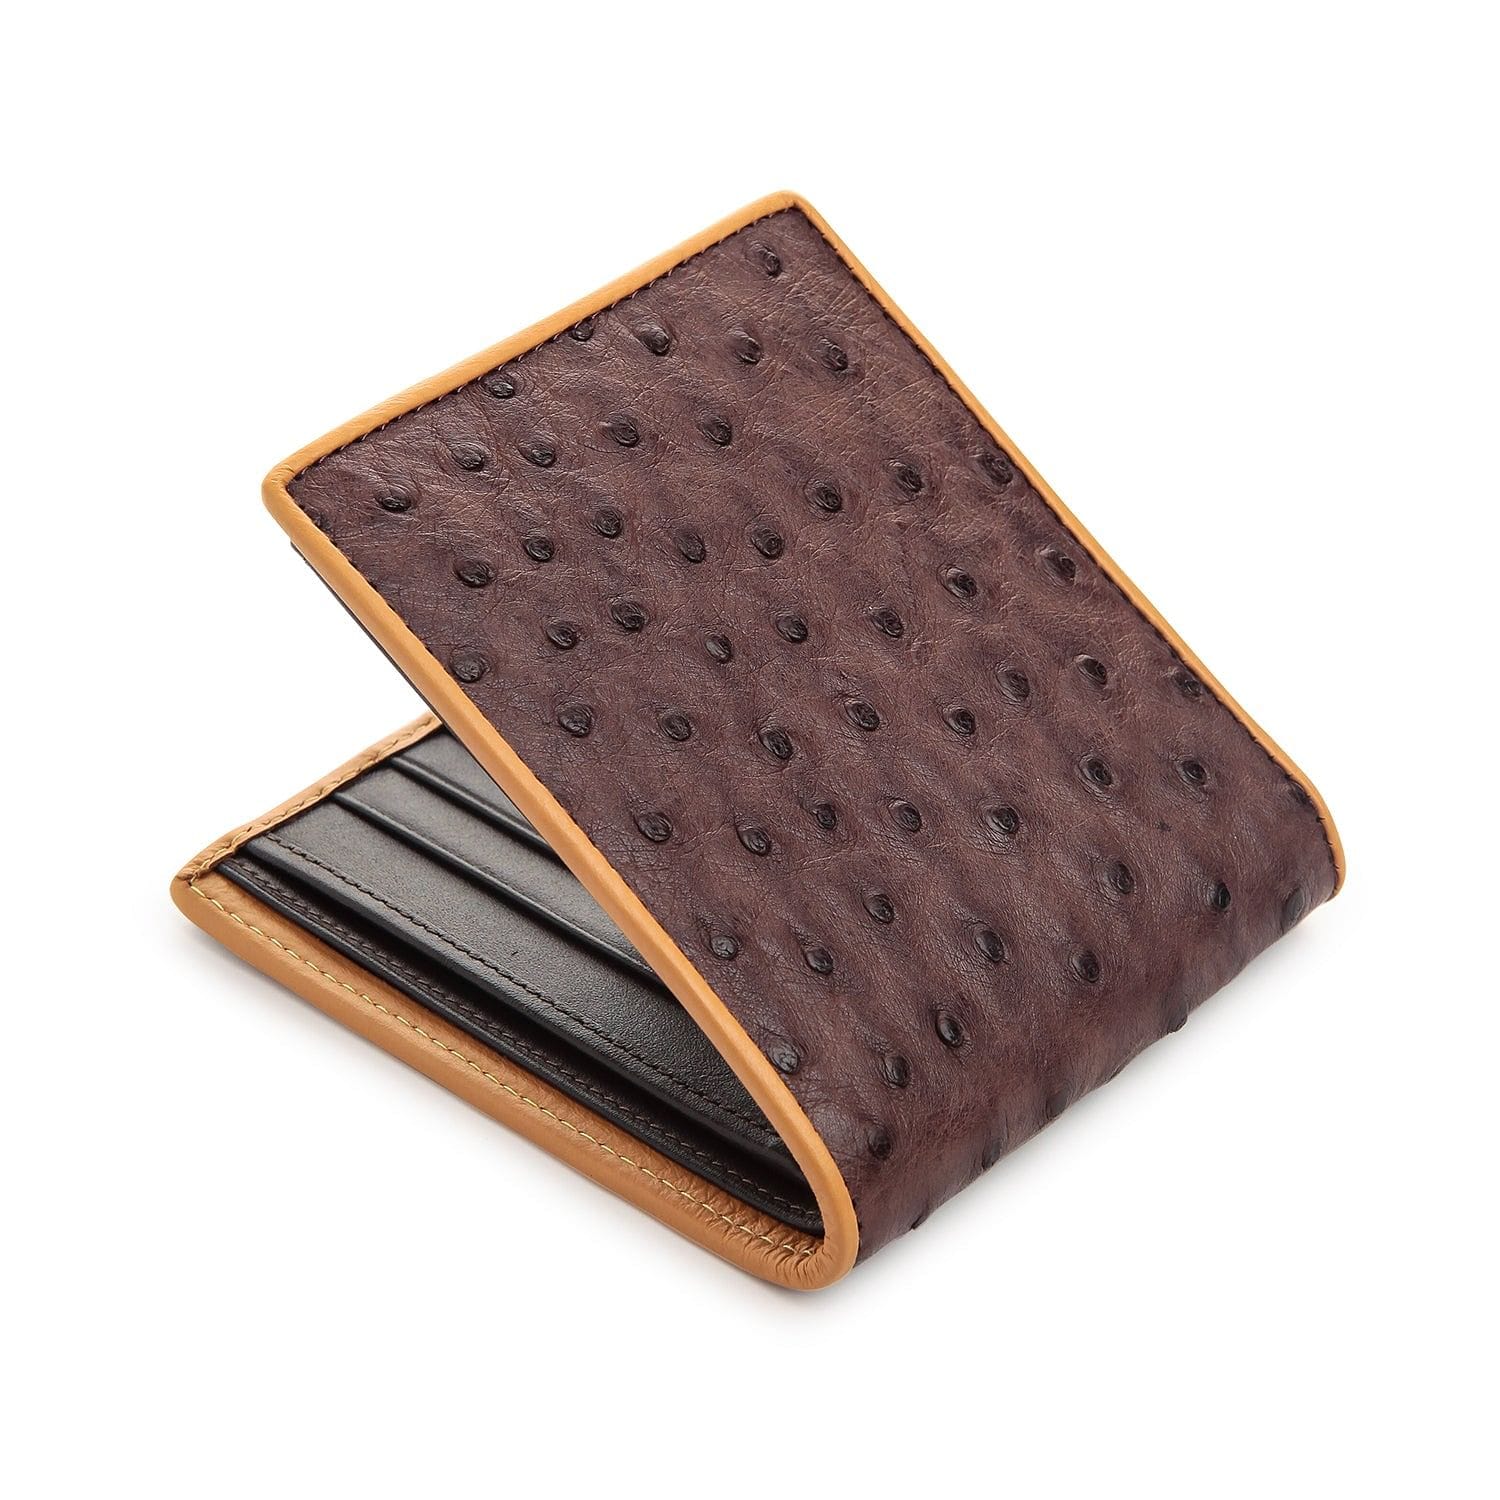 Wallet OSTRICH LEATHER MIDNIGHT DREAM buy with discount & delivery - A&V